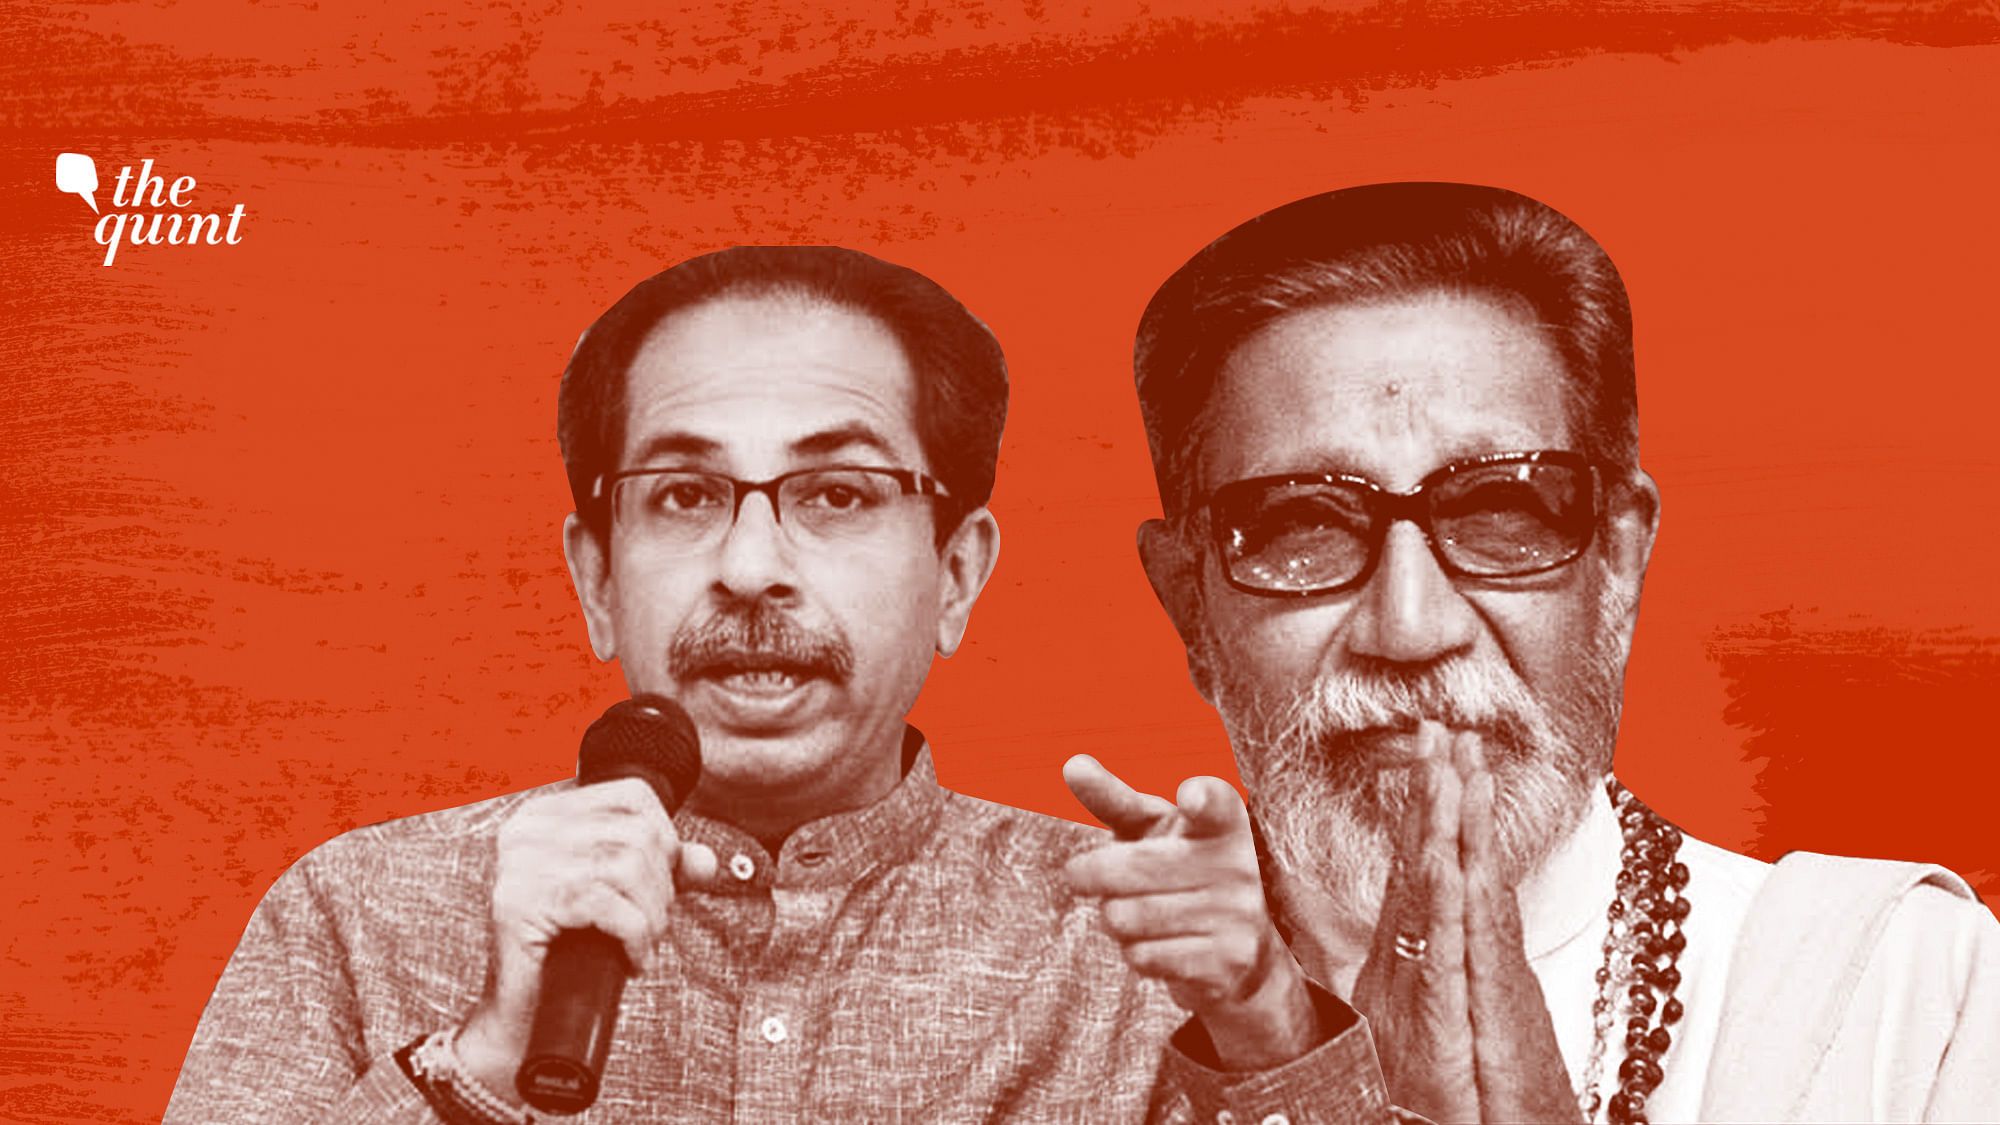 Image of Uddhav Thackeray (L) and the late Bal Thackeray (R), his father, used for representational purposes.